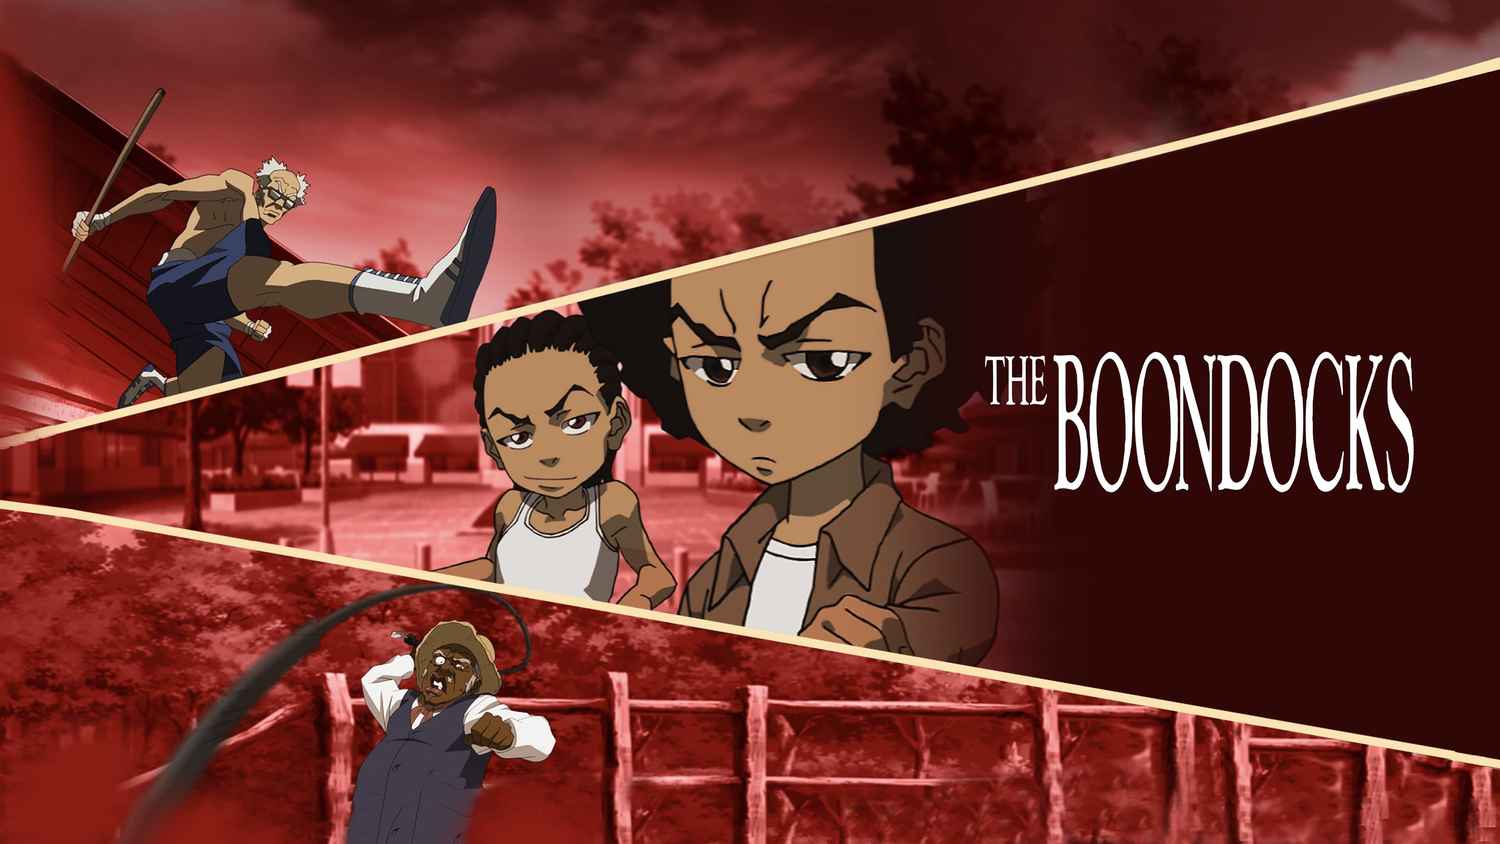 Watch The Boondocks Online, All Seasons or Episodes, Comedy Show/Web Series...